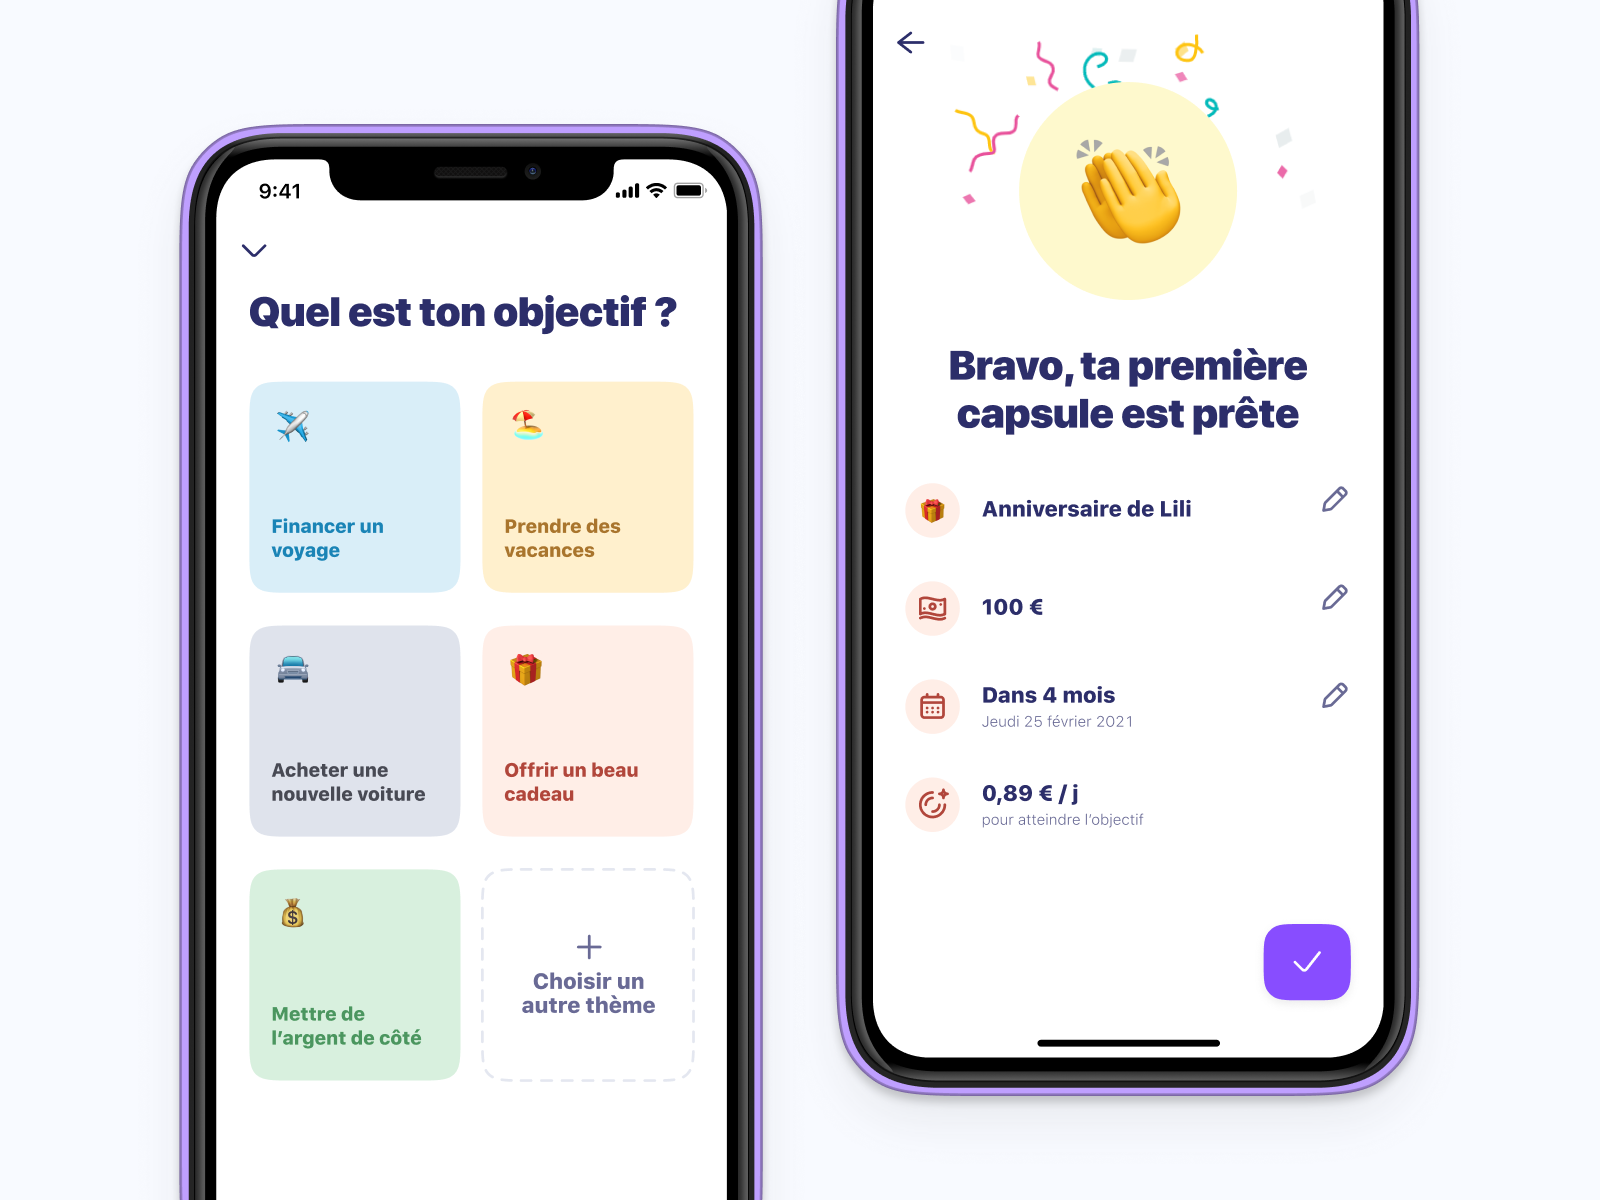 First Capsule Creation 🛸 by Maxime Siméon on Dribbble